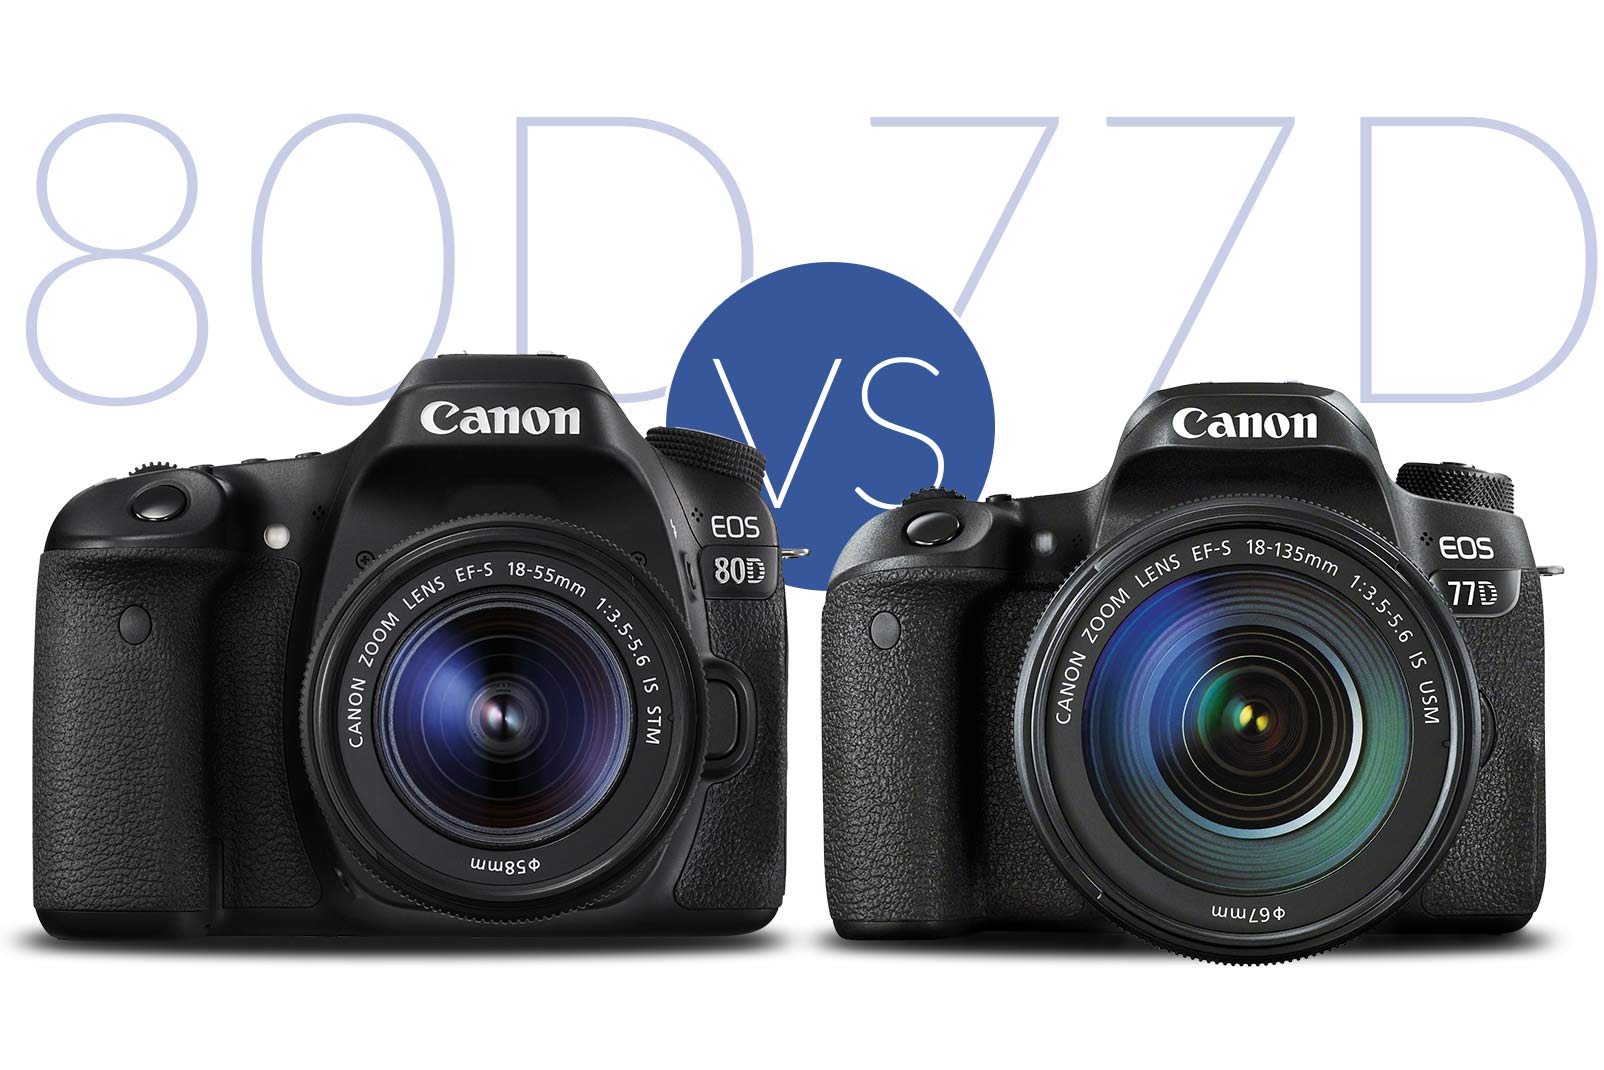 Tamron 17-70 vs Sony 18-135: Which one is BETTER for HIKING? 